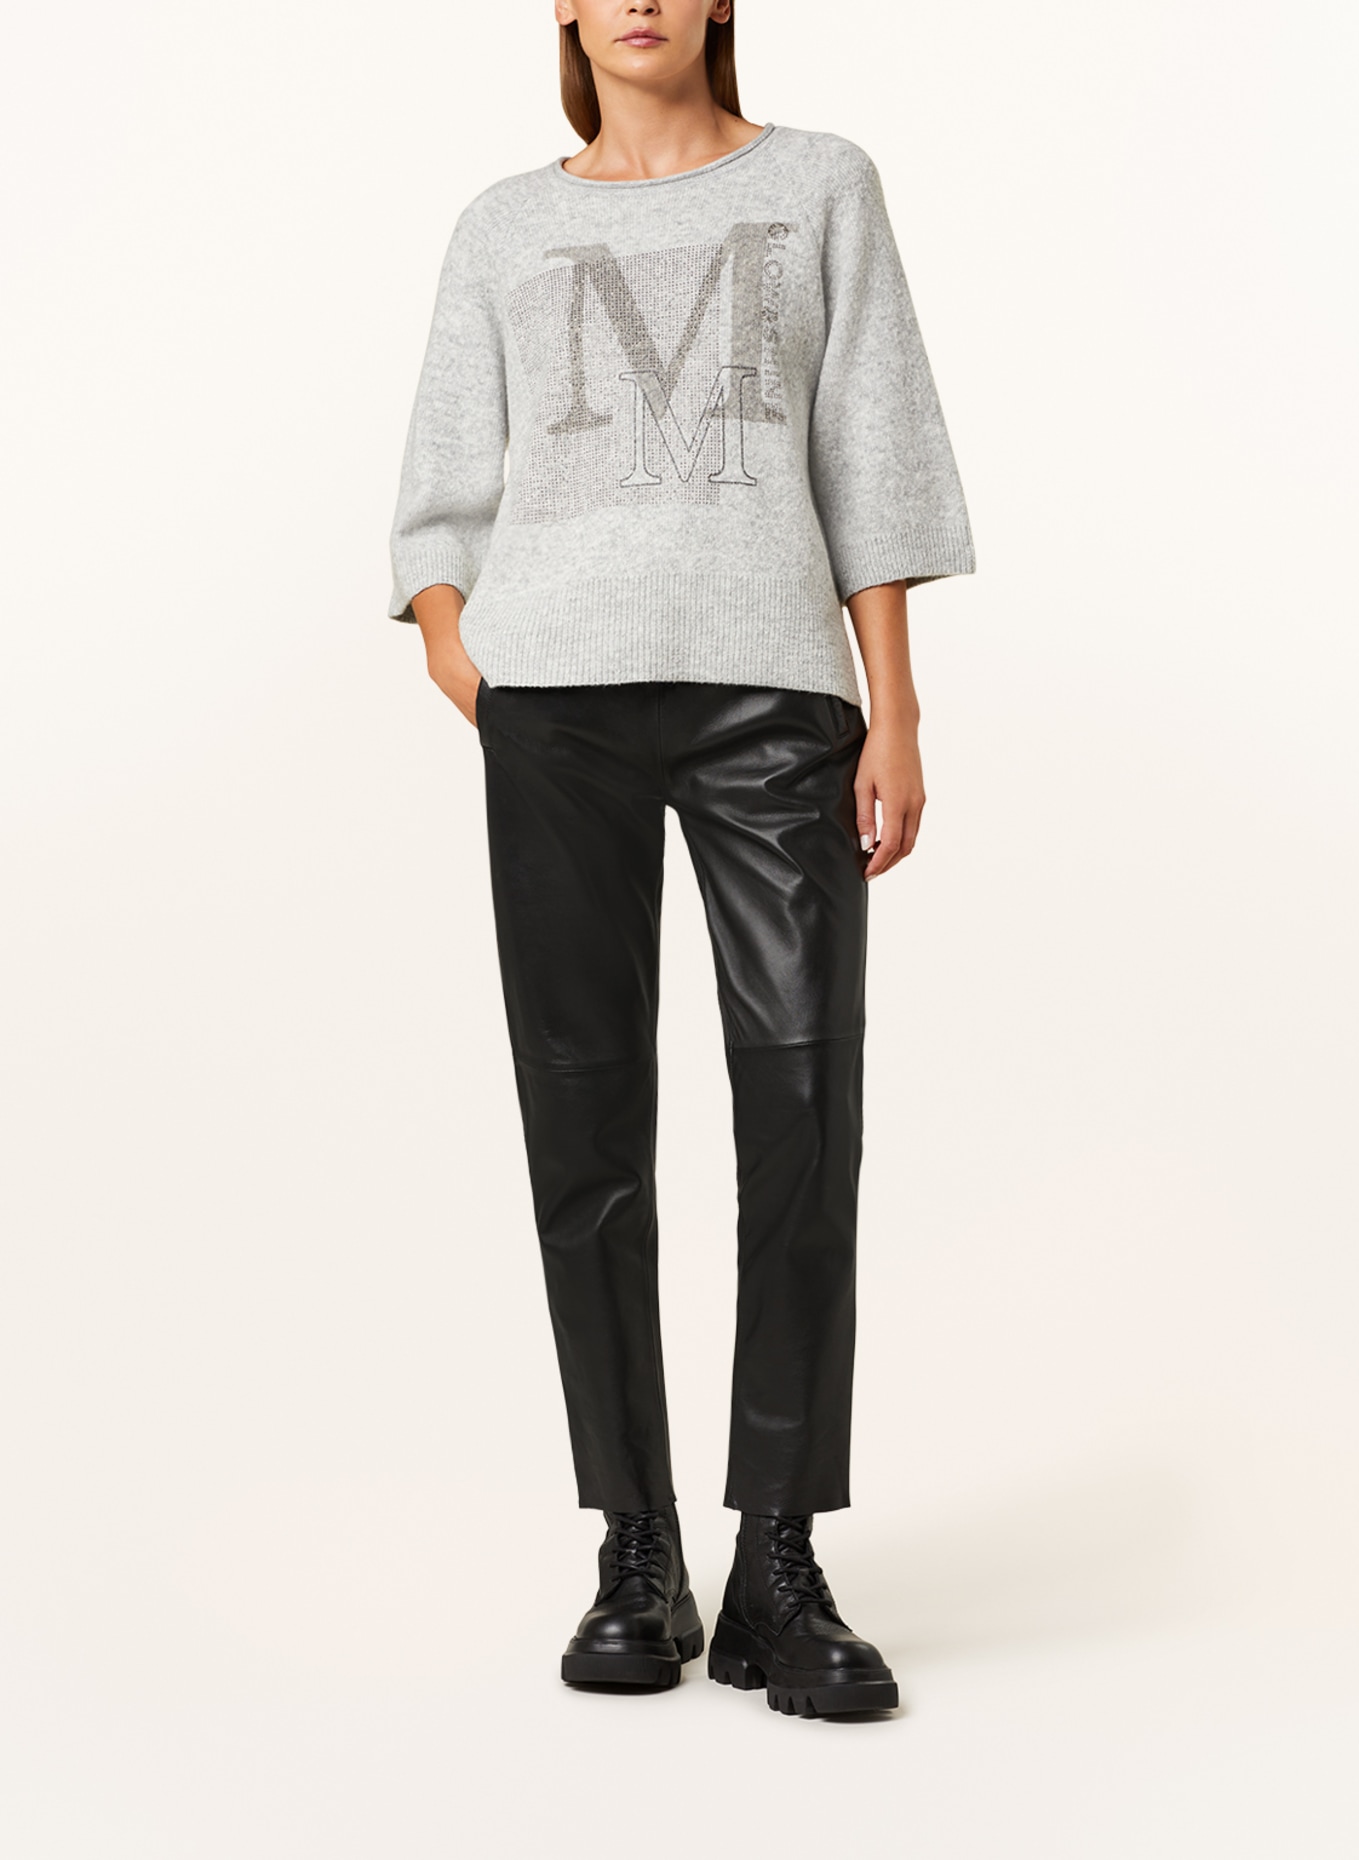 monari Sweater with 3/4 sleeves and decorative gems, Color: GRAY (Image 2)